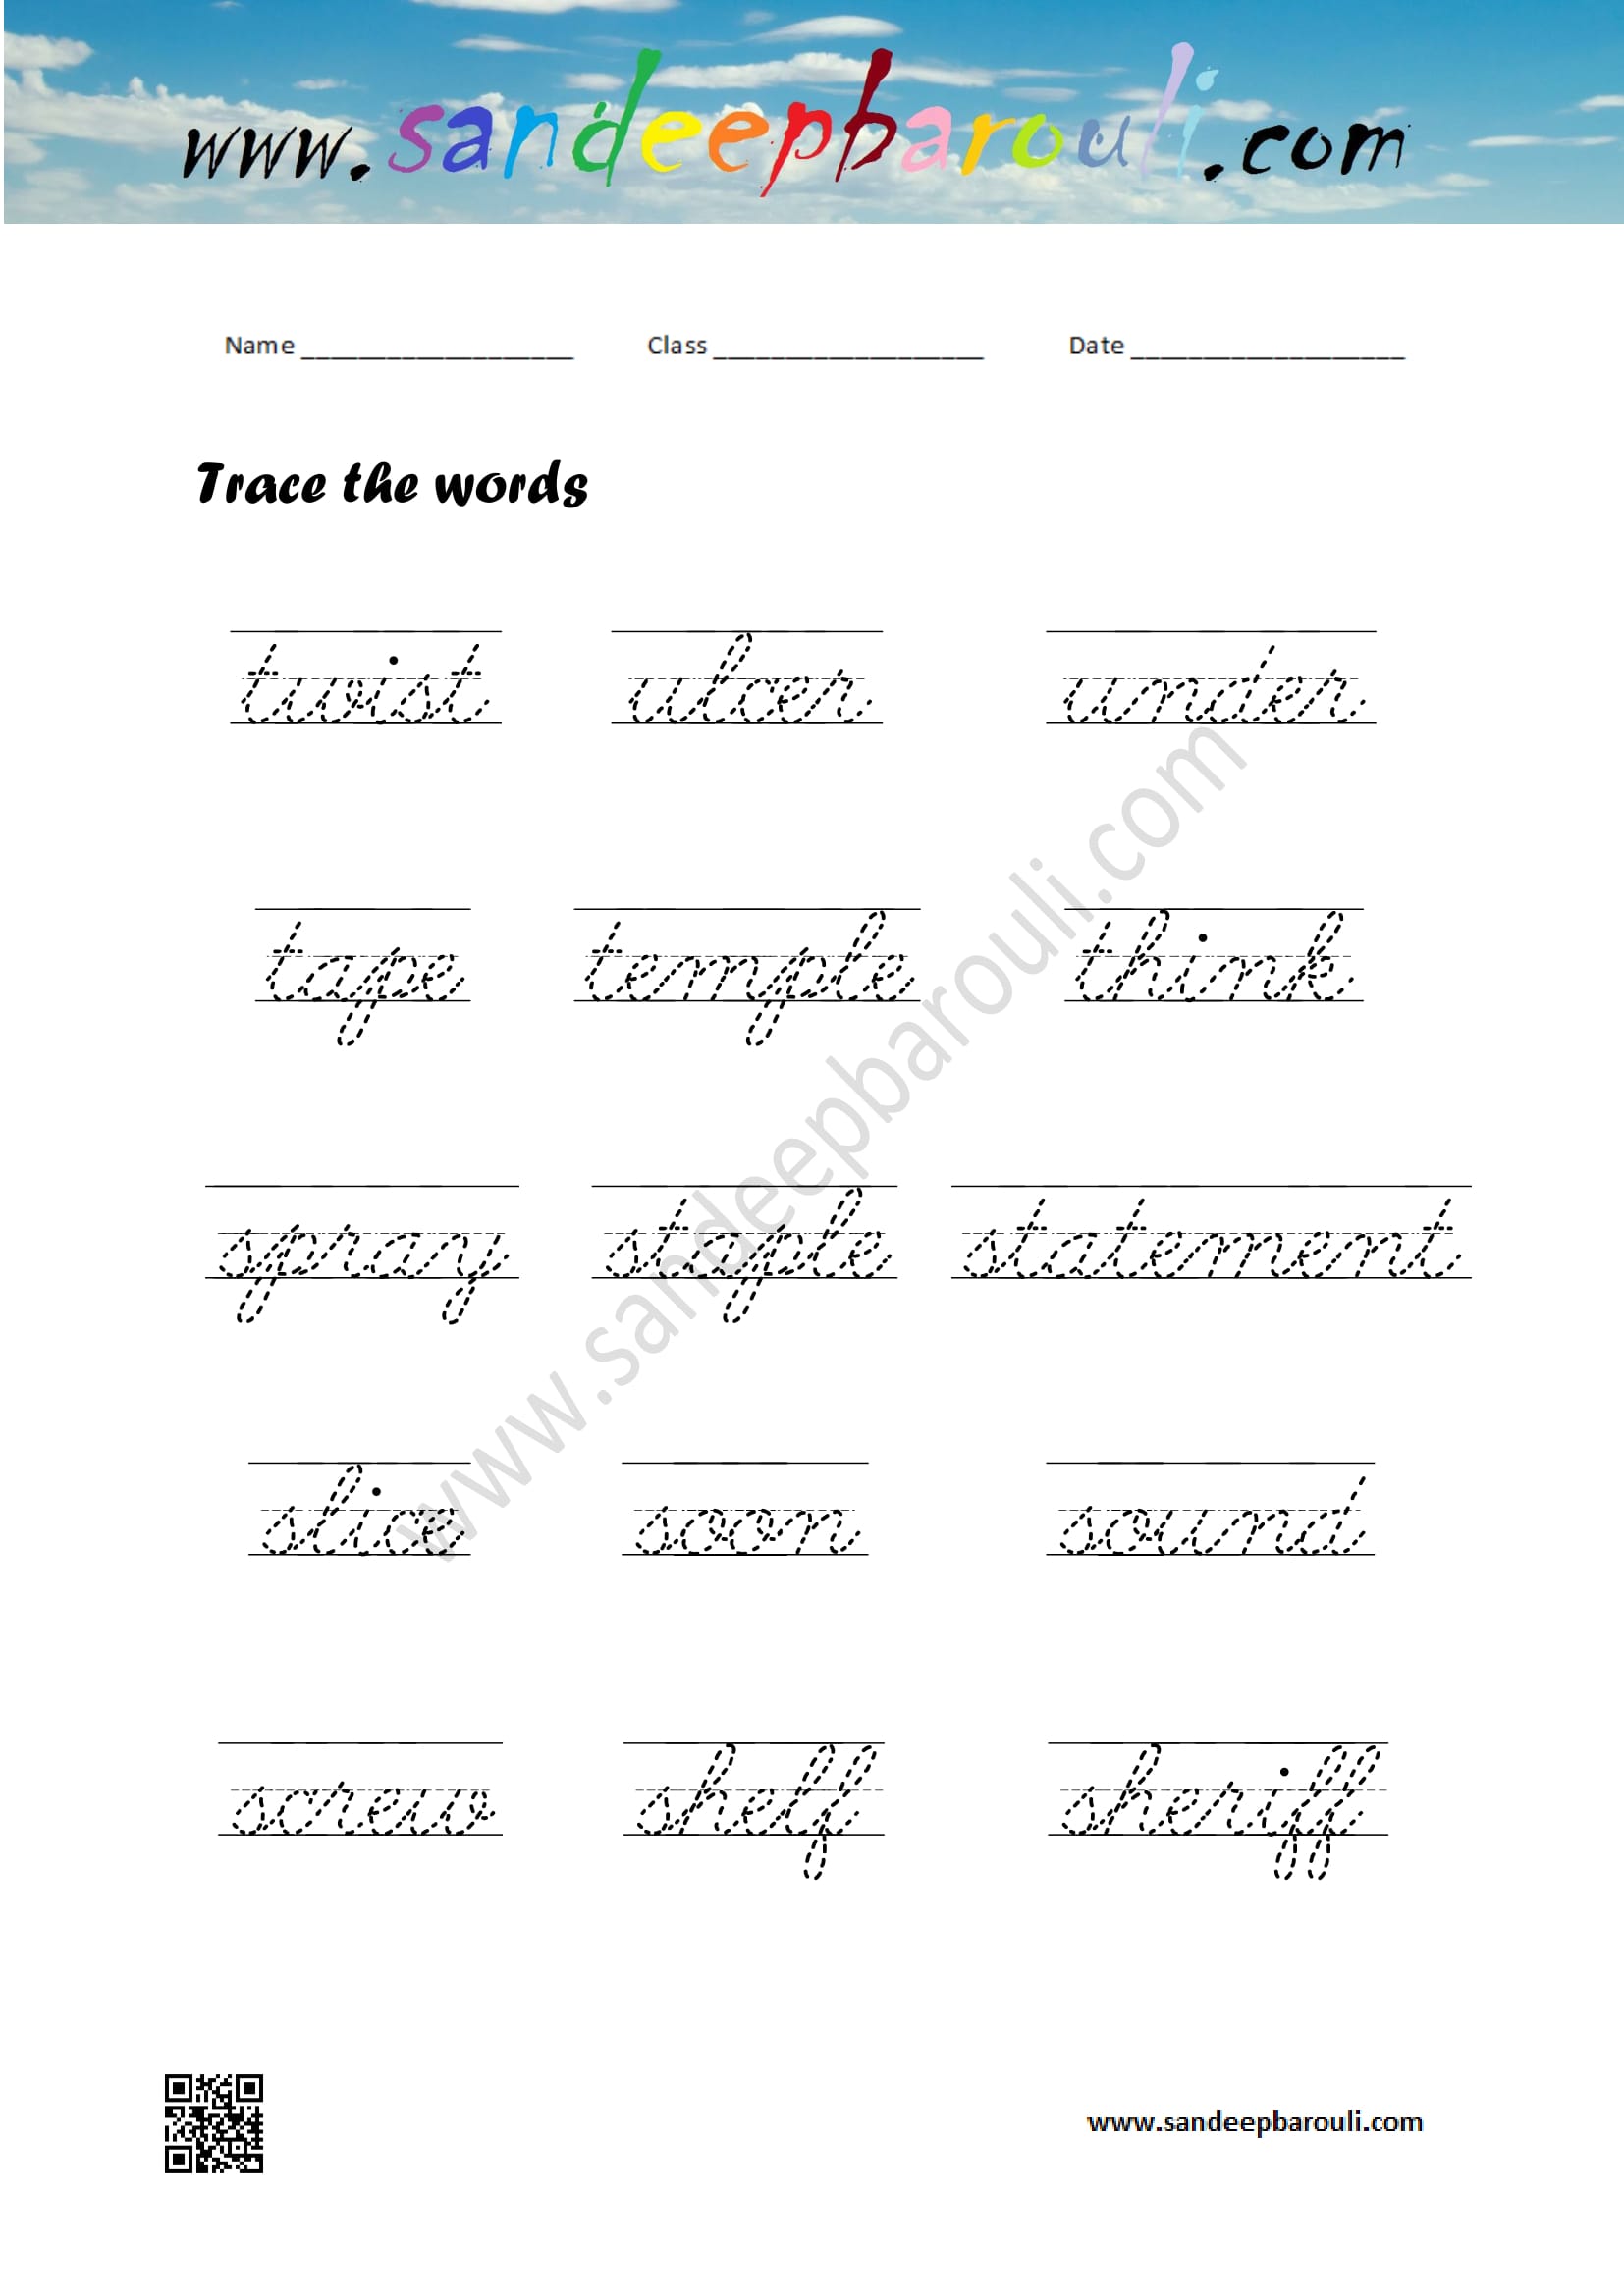 Cursive Writing Worksheet Trace the words 14